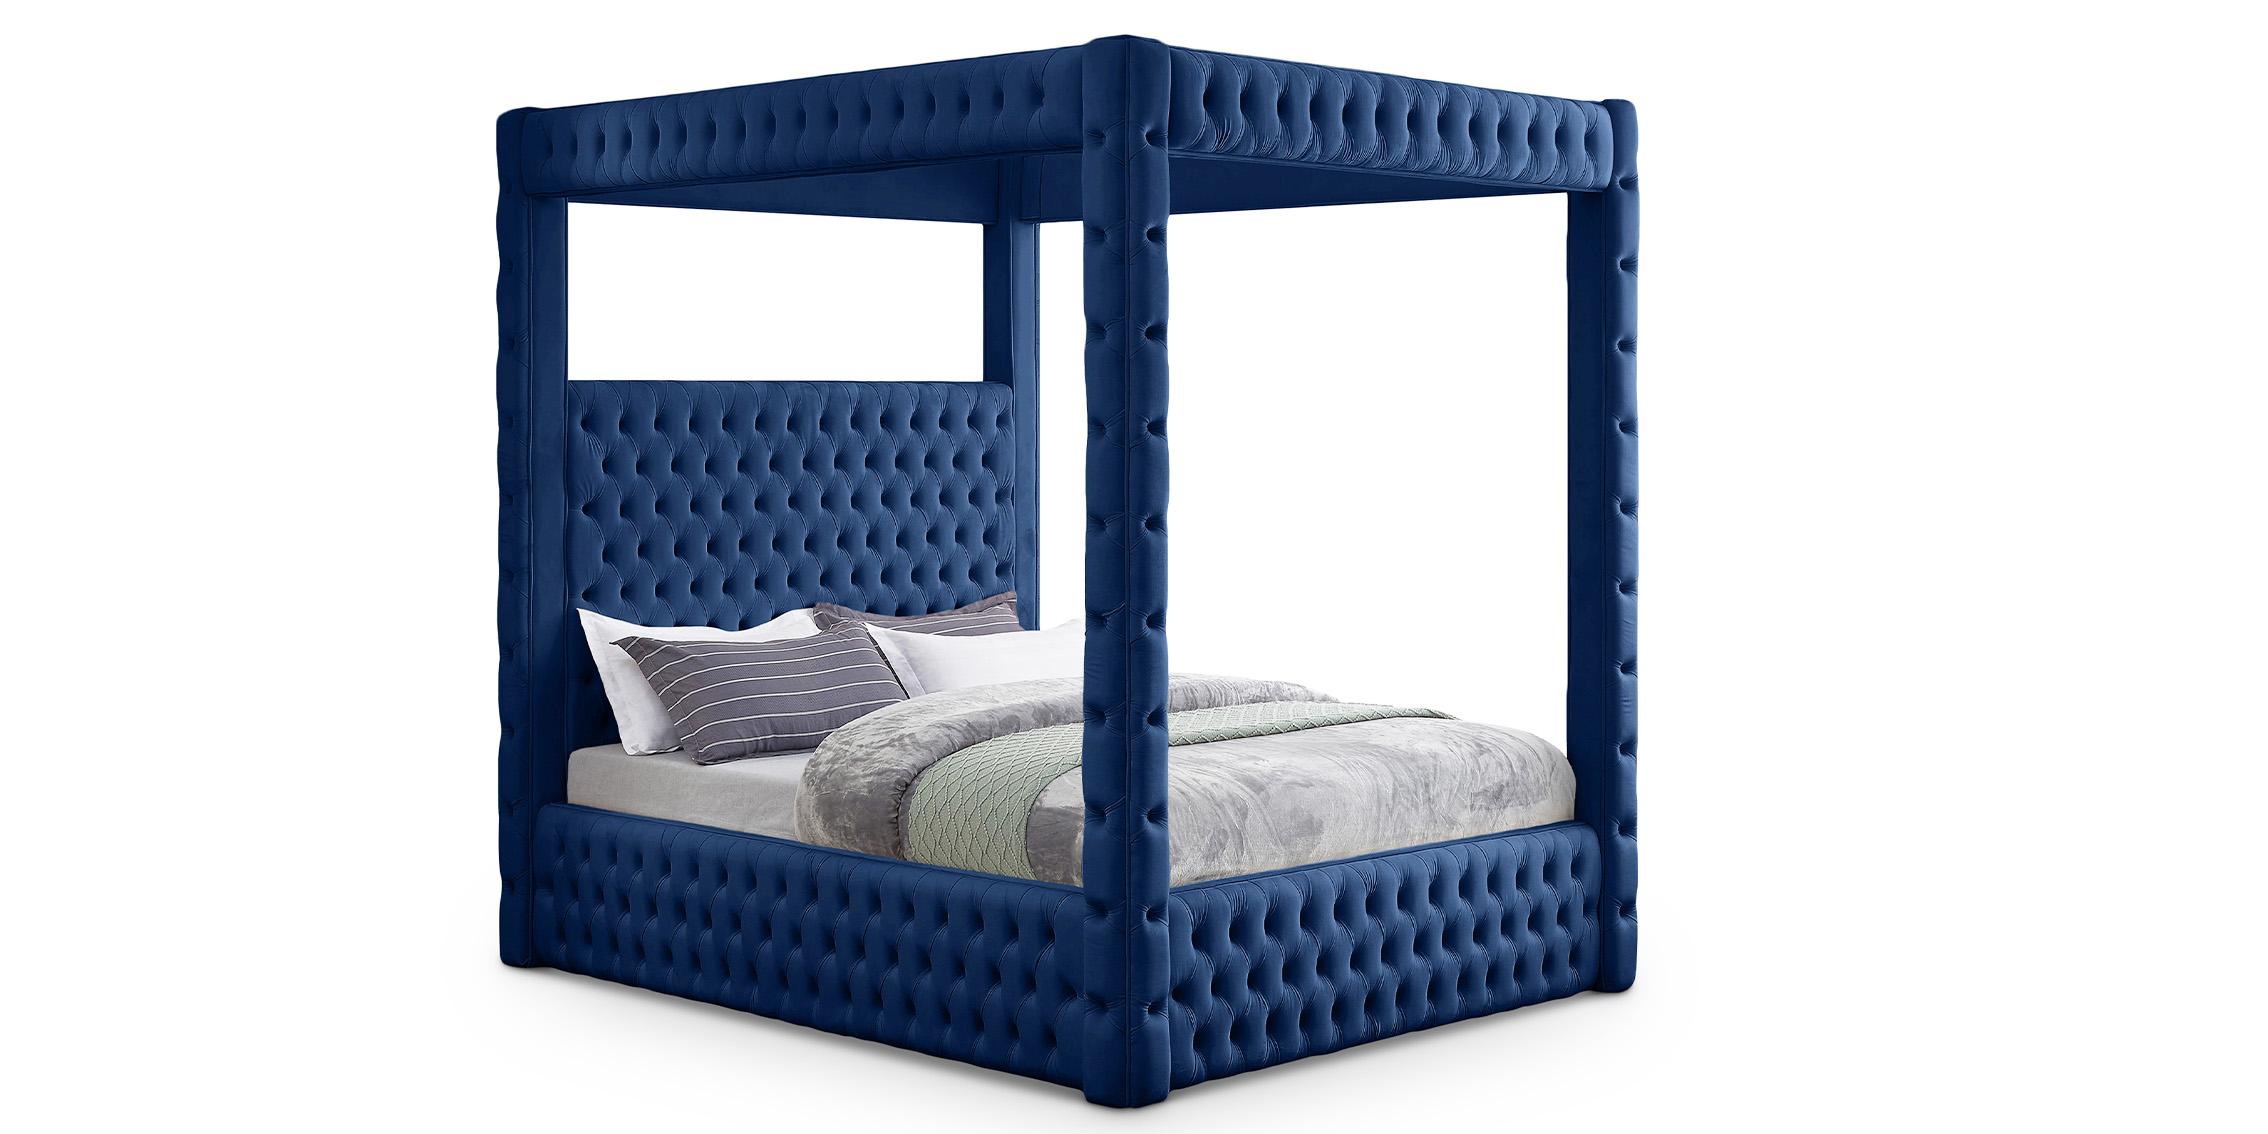 

    
Navy Velvet Tufted Queen Canopy Bed ROYAL RoyalNavy-Q Meridian Contemporary
